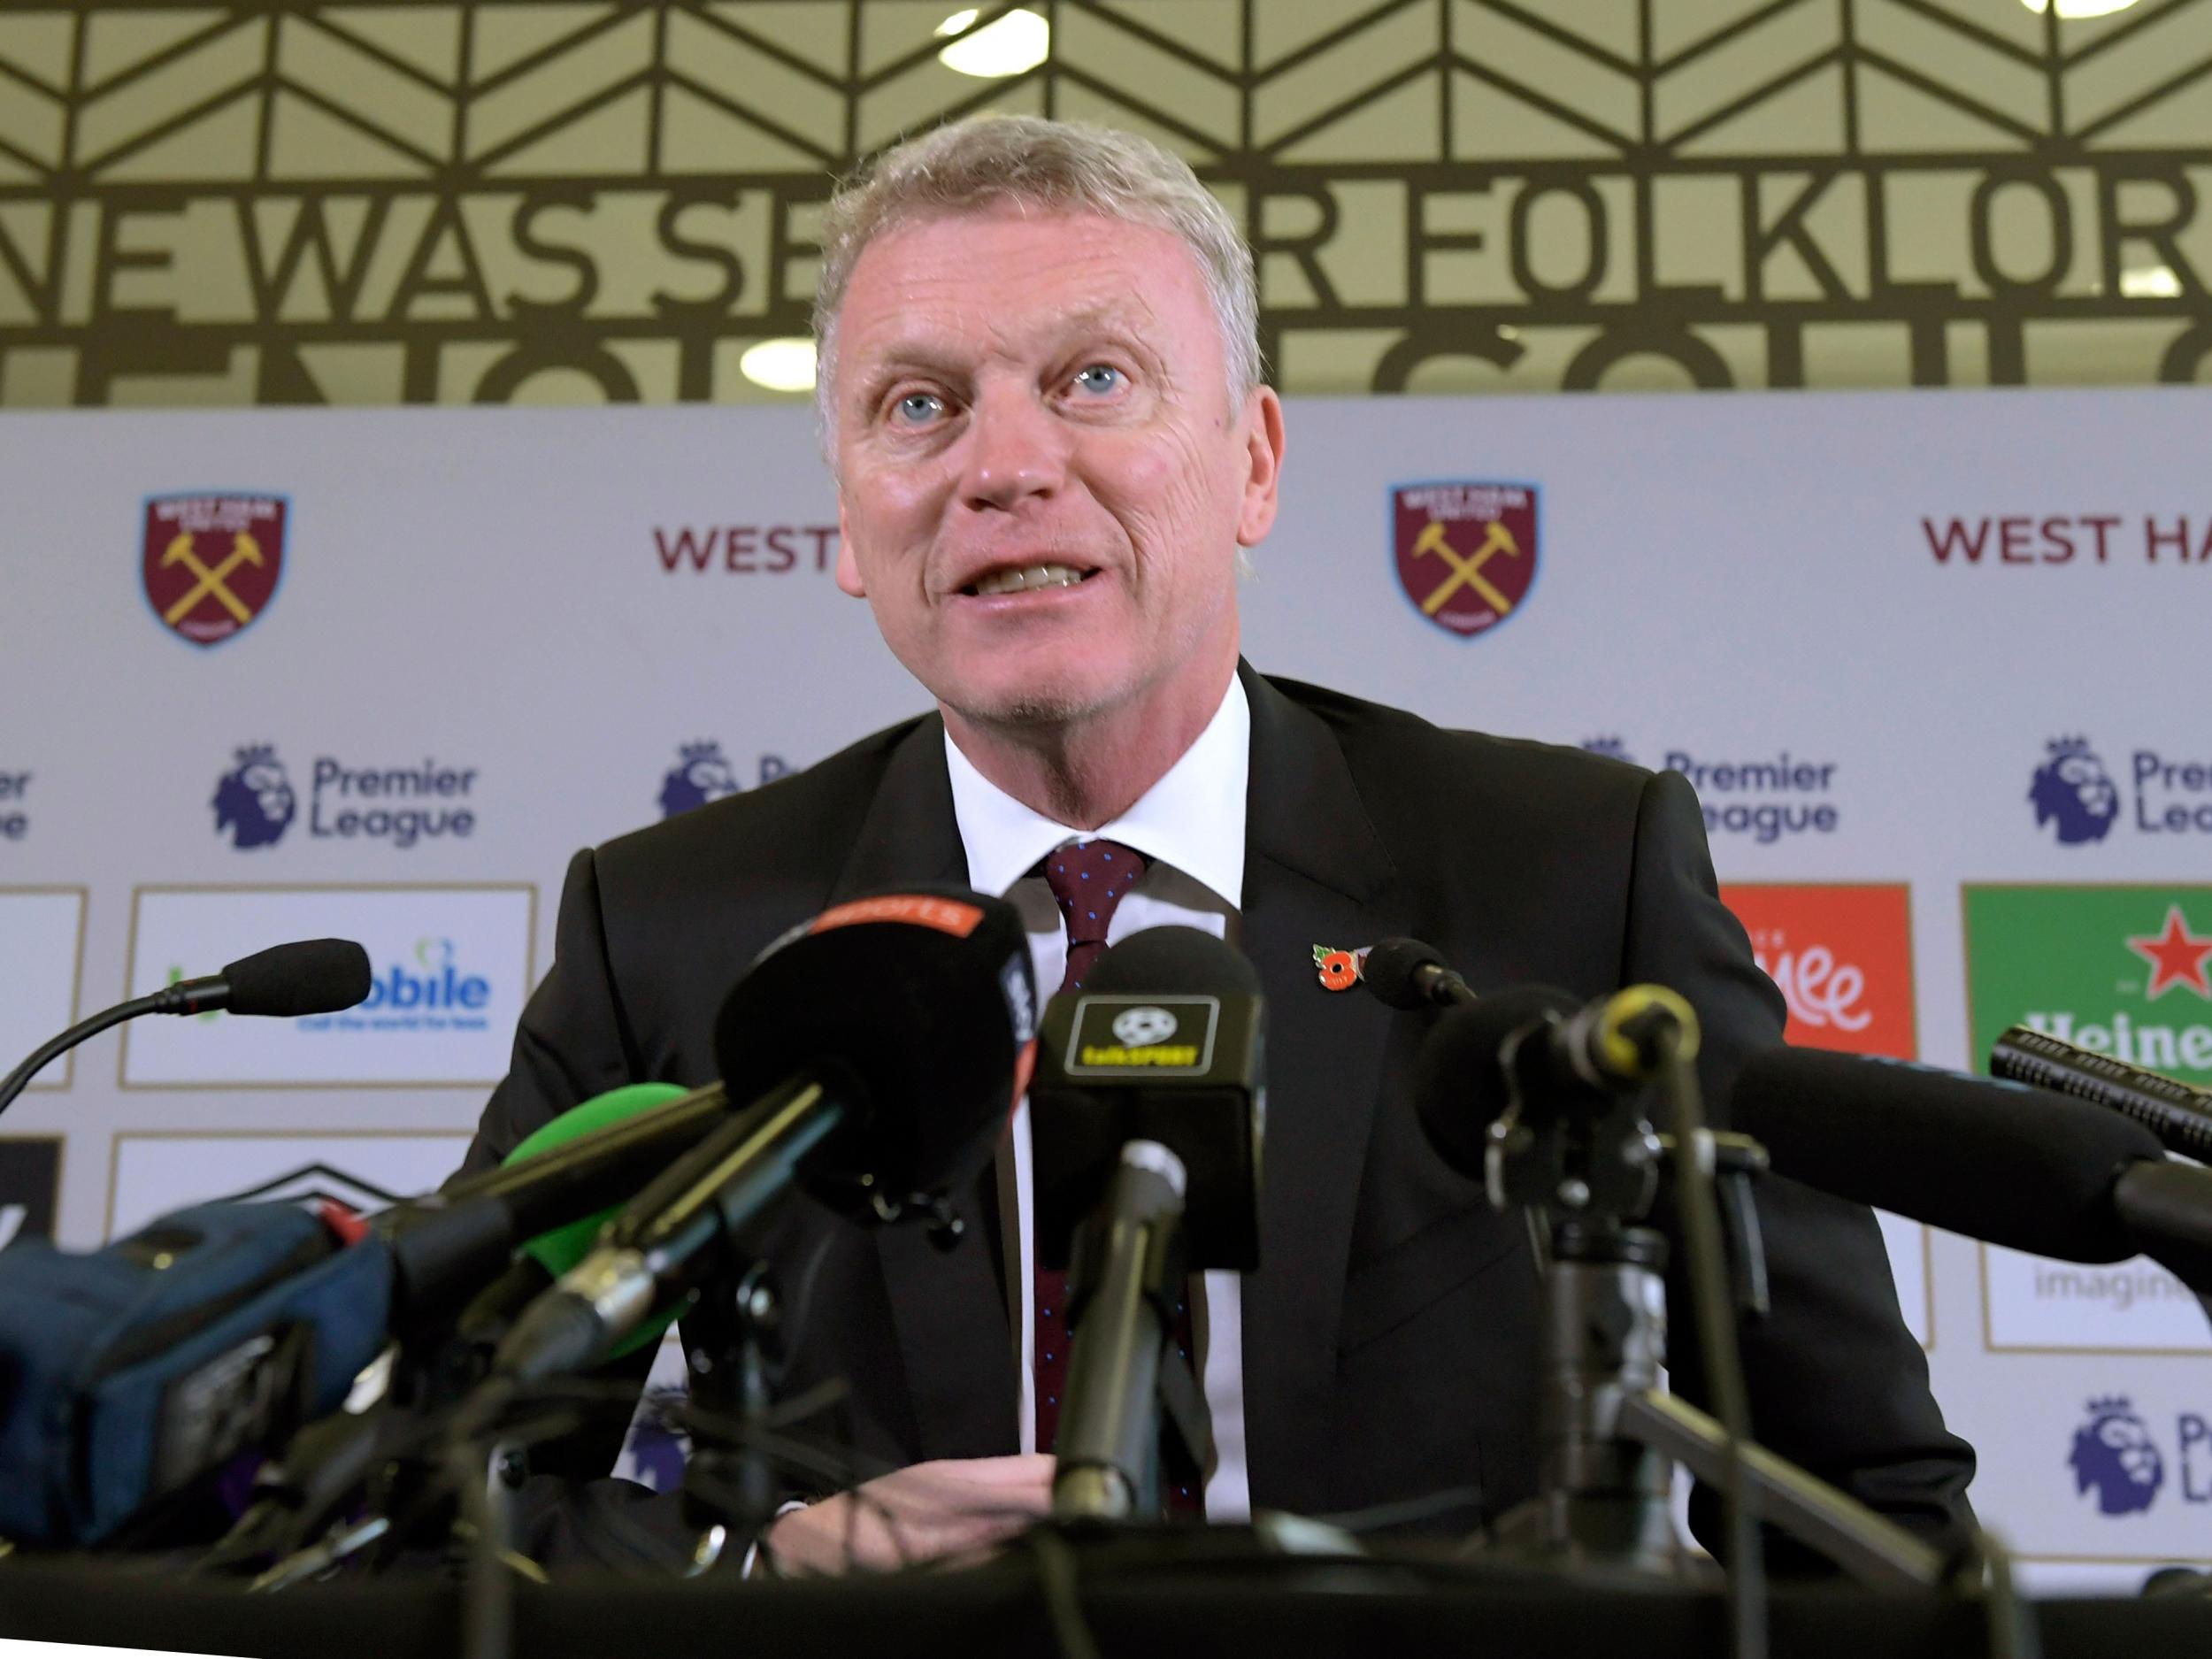 David Moyes has until the end of the season to turn West Ham's fortunes around